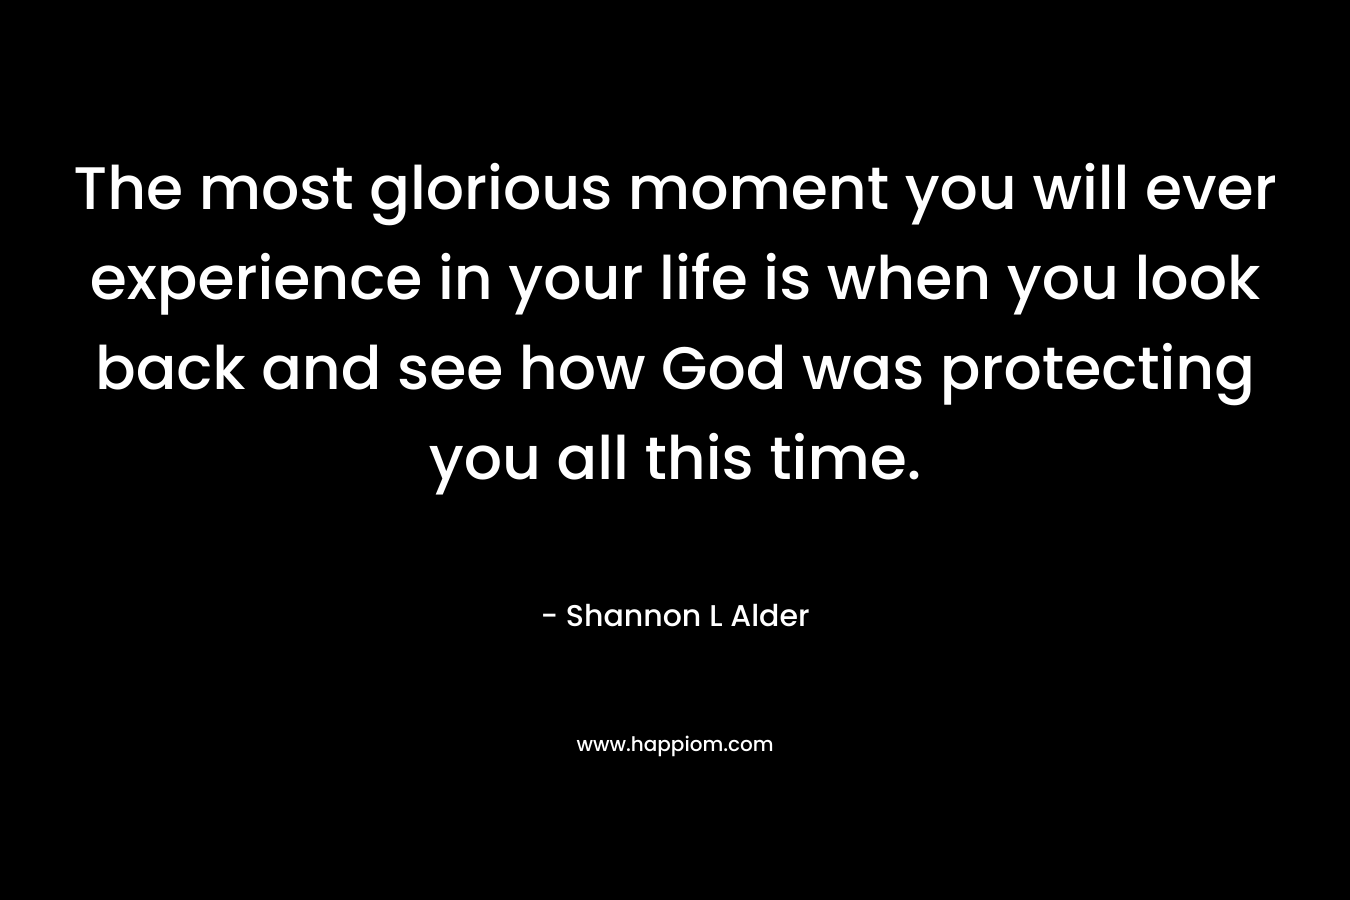 The most glorious moment you will ever experience in your life is when you look back and see how God was protecting you all this time.